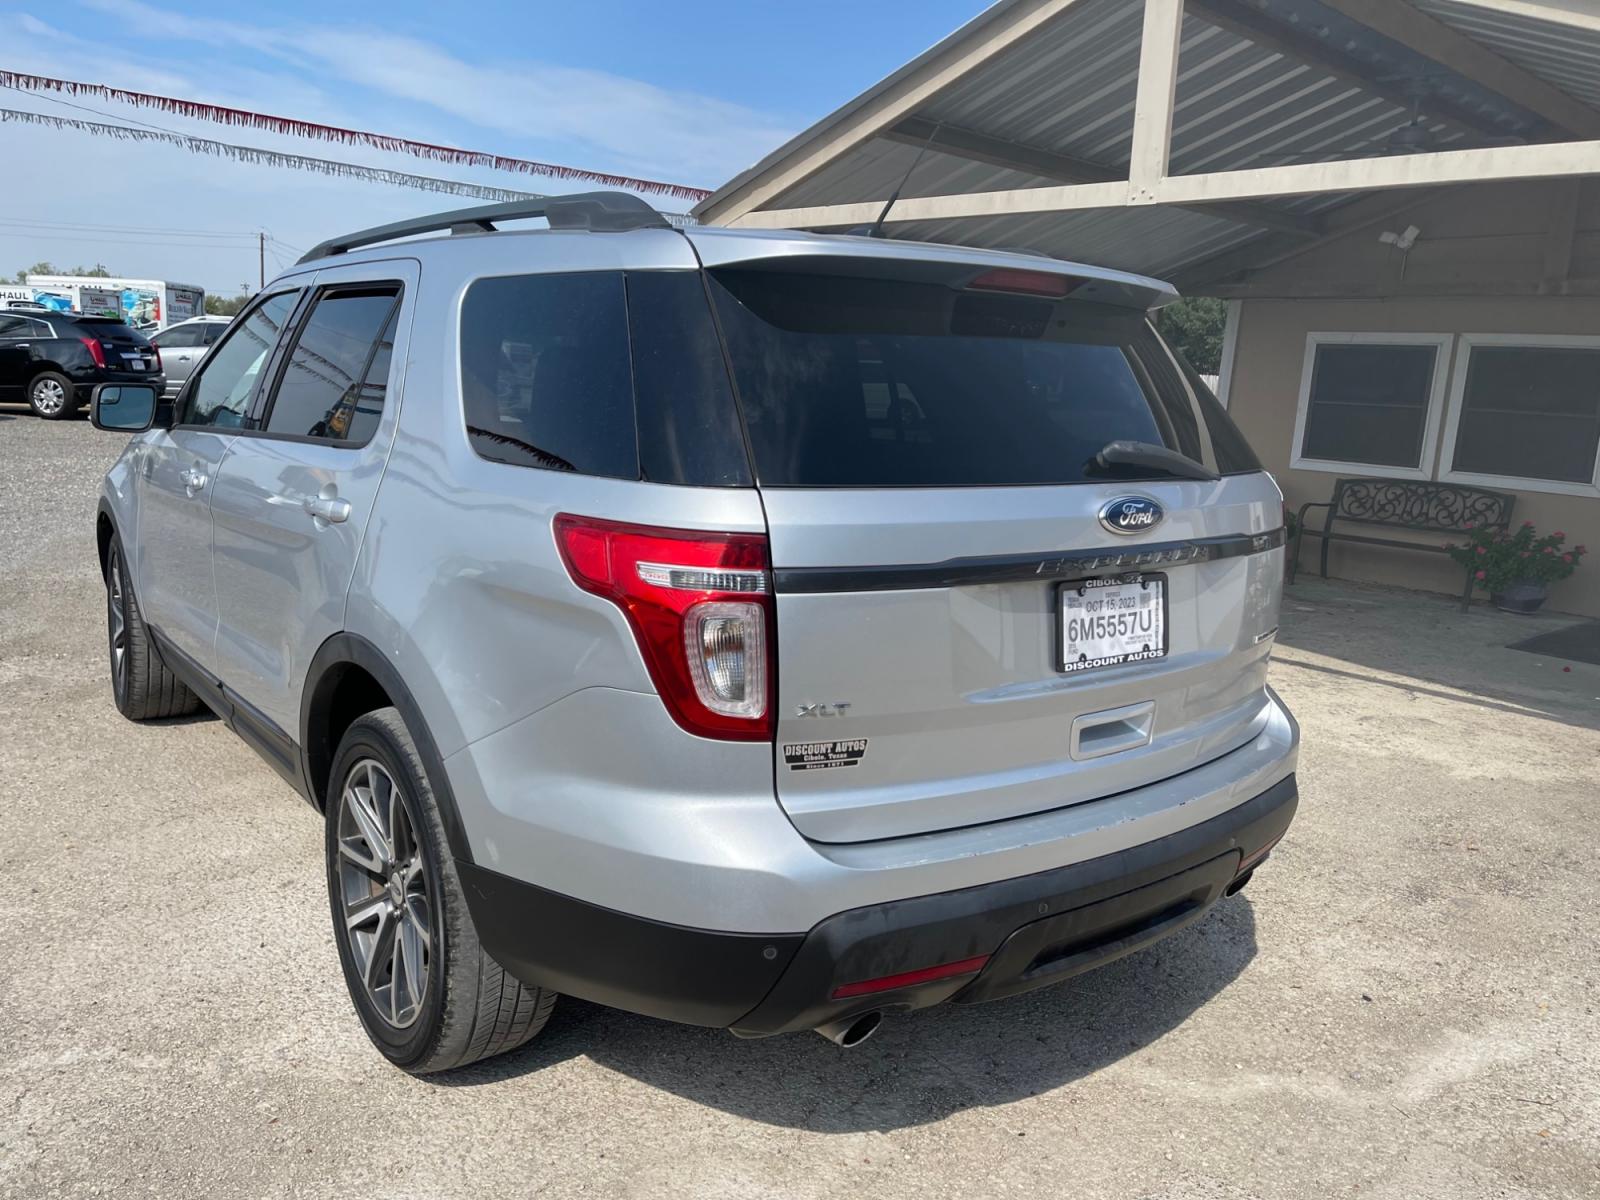 2015 SILVER FORD EXPLORER XLT (1FM5K7D80FG) with an 3.5L engine, Automatic transmission - www.discountautosinc.com TEXT QUESTIONS TO 210-900-3118 41 MONTHLY PAYMENTS OF $365 WITH $2695 DOWN AND FINAL ODD PAYMENT OF $337.06 W/FIRST PAYMENT DUE 30 DAYS FROM DATE OF SALE. FEATURES: BACK UP CAMERA, QUAD SEATING, 3RD ROW, HEATED LEATHER SEATING, ELECTRIC REAR HATCH WARRANTY - Photo #1